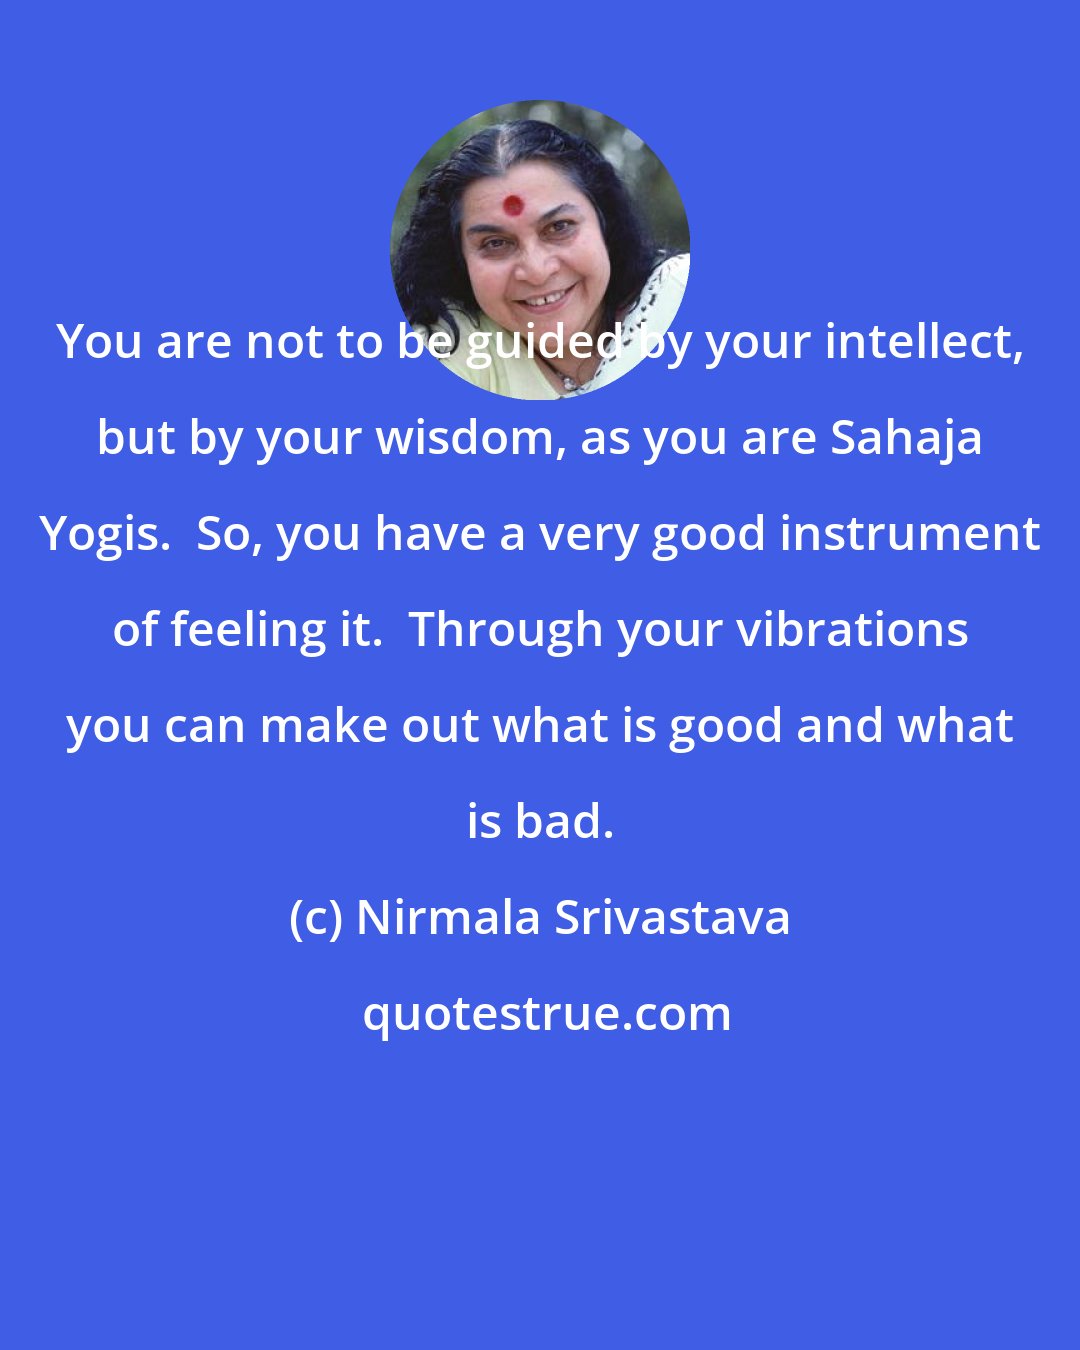 Nirmala Srivastava: You are not to be guided by your intellect, but by your wisdom, as you are Sahaja Yogis.  So, you have a very good instrument of feeling it.  Through your vibrations you can make out what is good and what is bad.